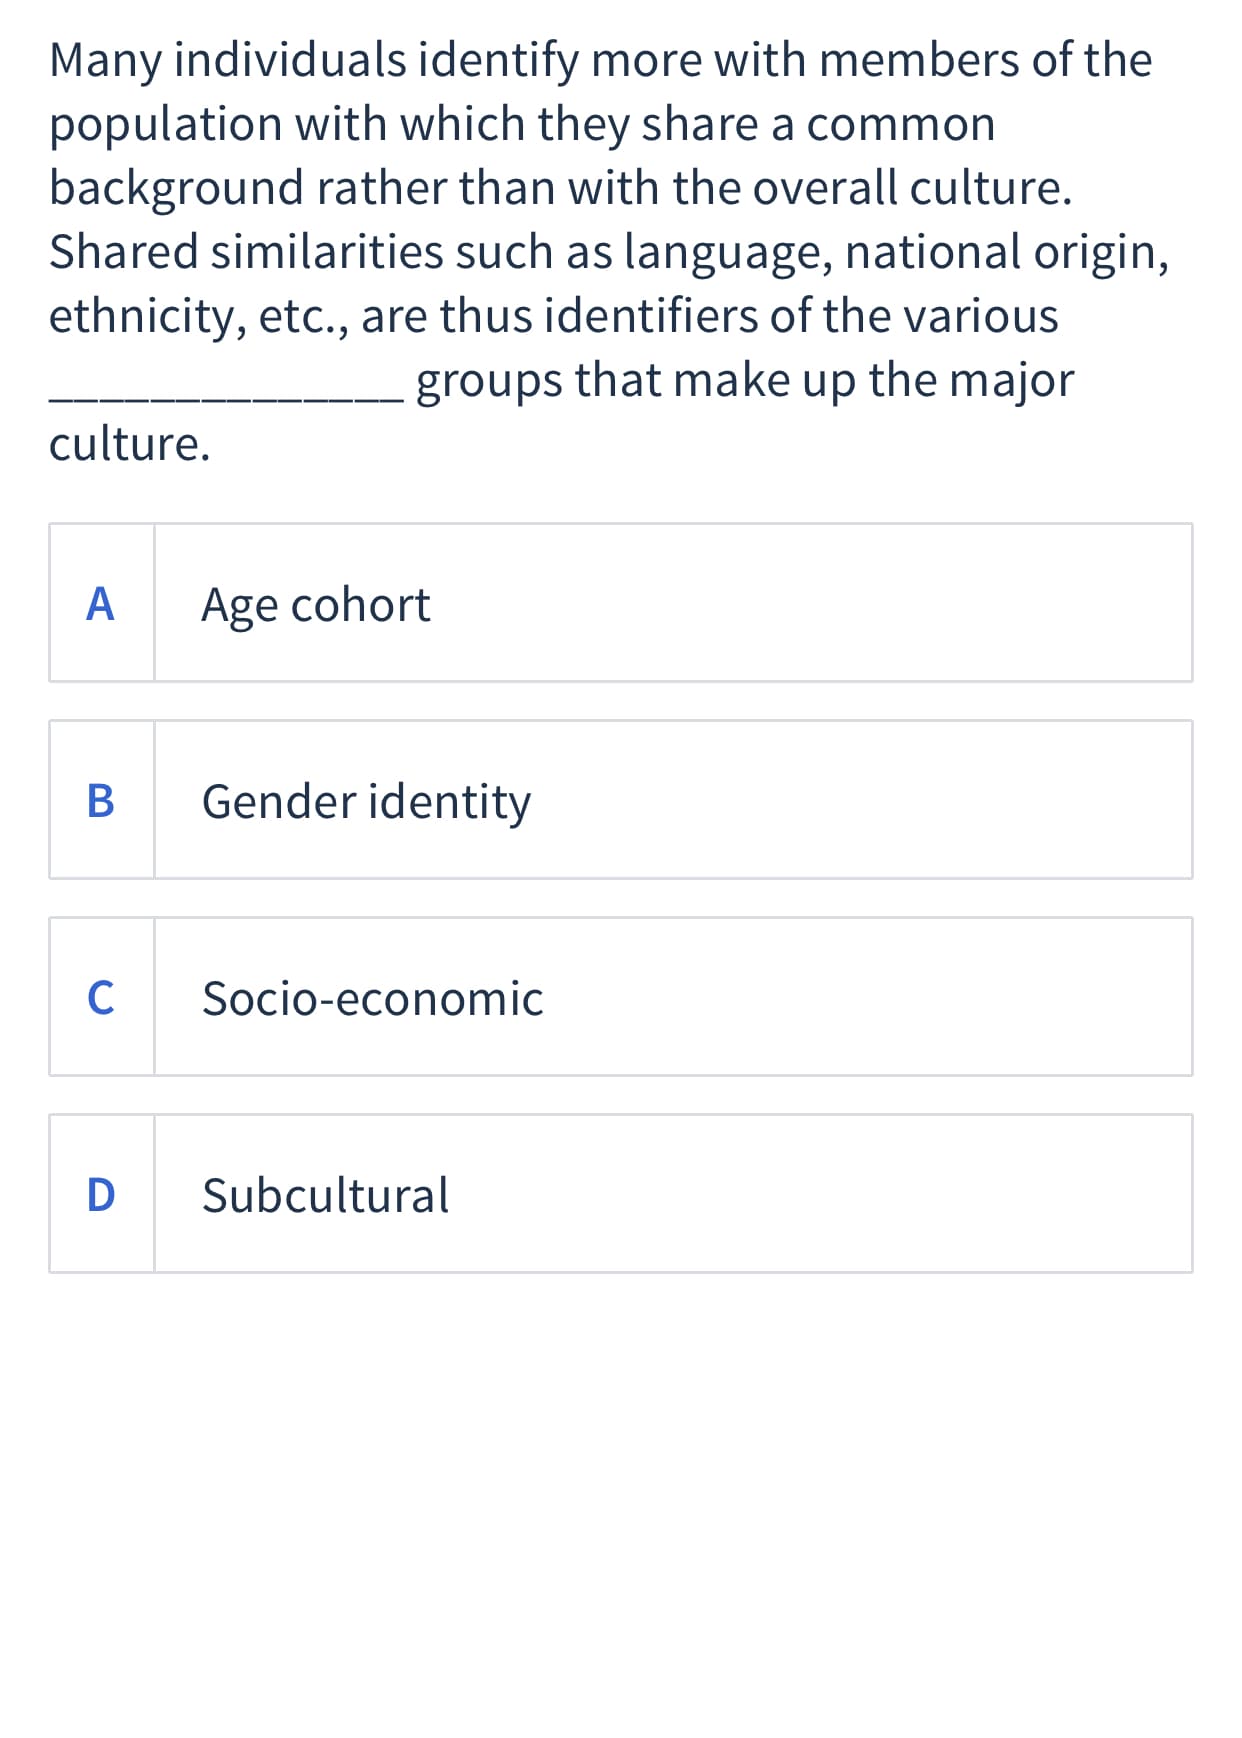 Many individuals identify more with members of the
population with which they share a common
background rather than with the overall culture.
Shared similarities such as language, national origin,
ethnicity, etc., are thus identifiers of the various
groups that make up the major
culture.
A
Age cohort
Gender identity
C
Socio-economic
D
Subcultural
